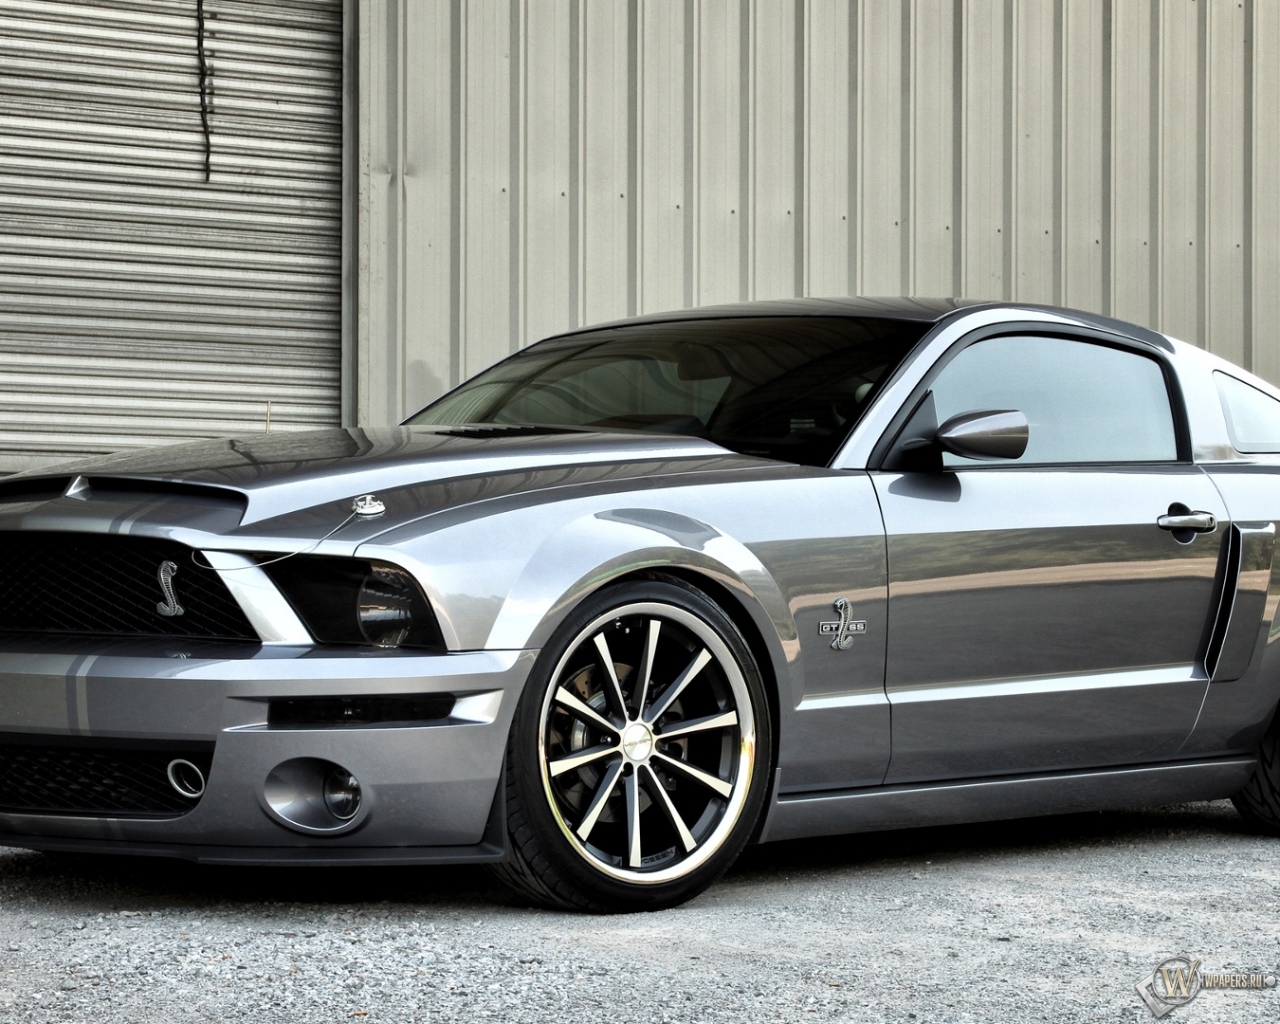 Ford Mustang Shelby GT500 1280x1024